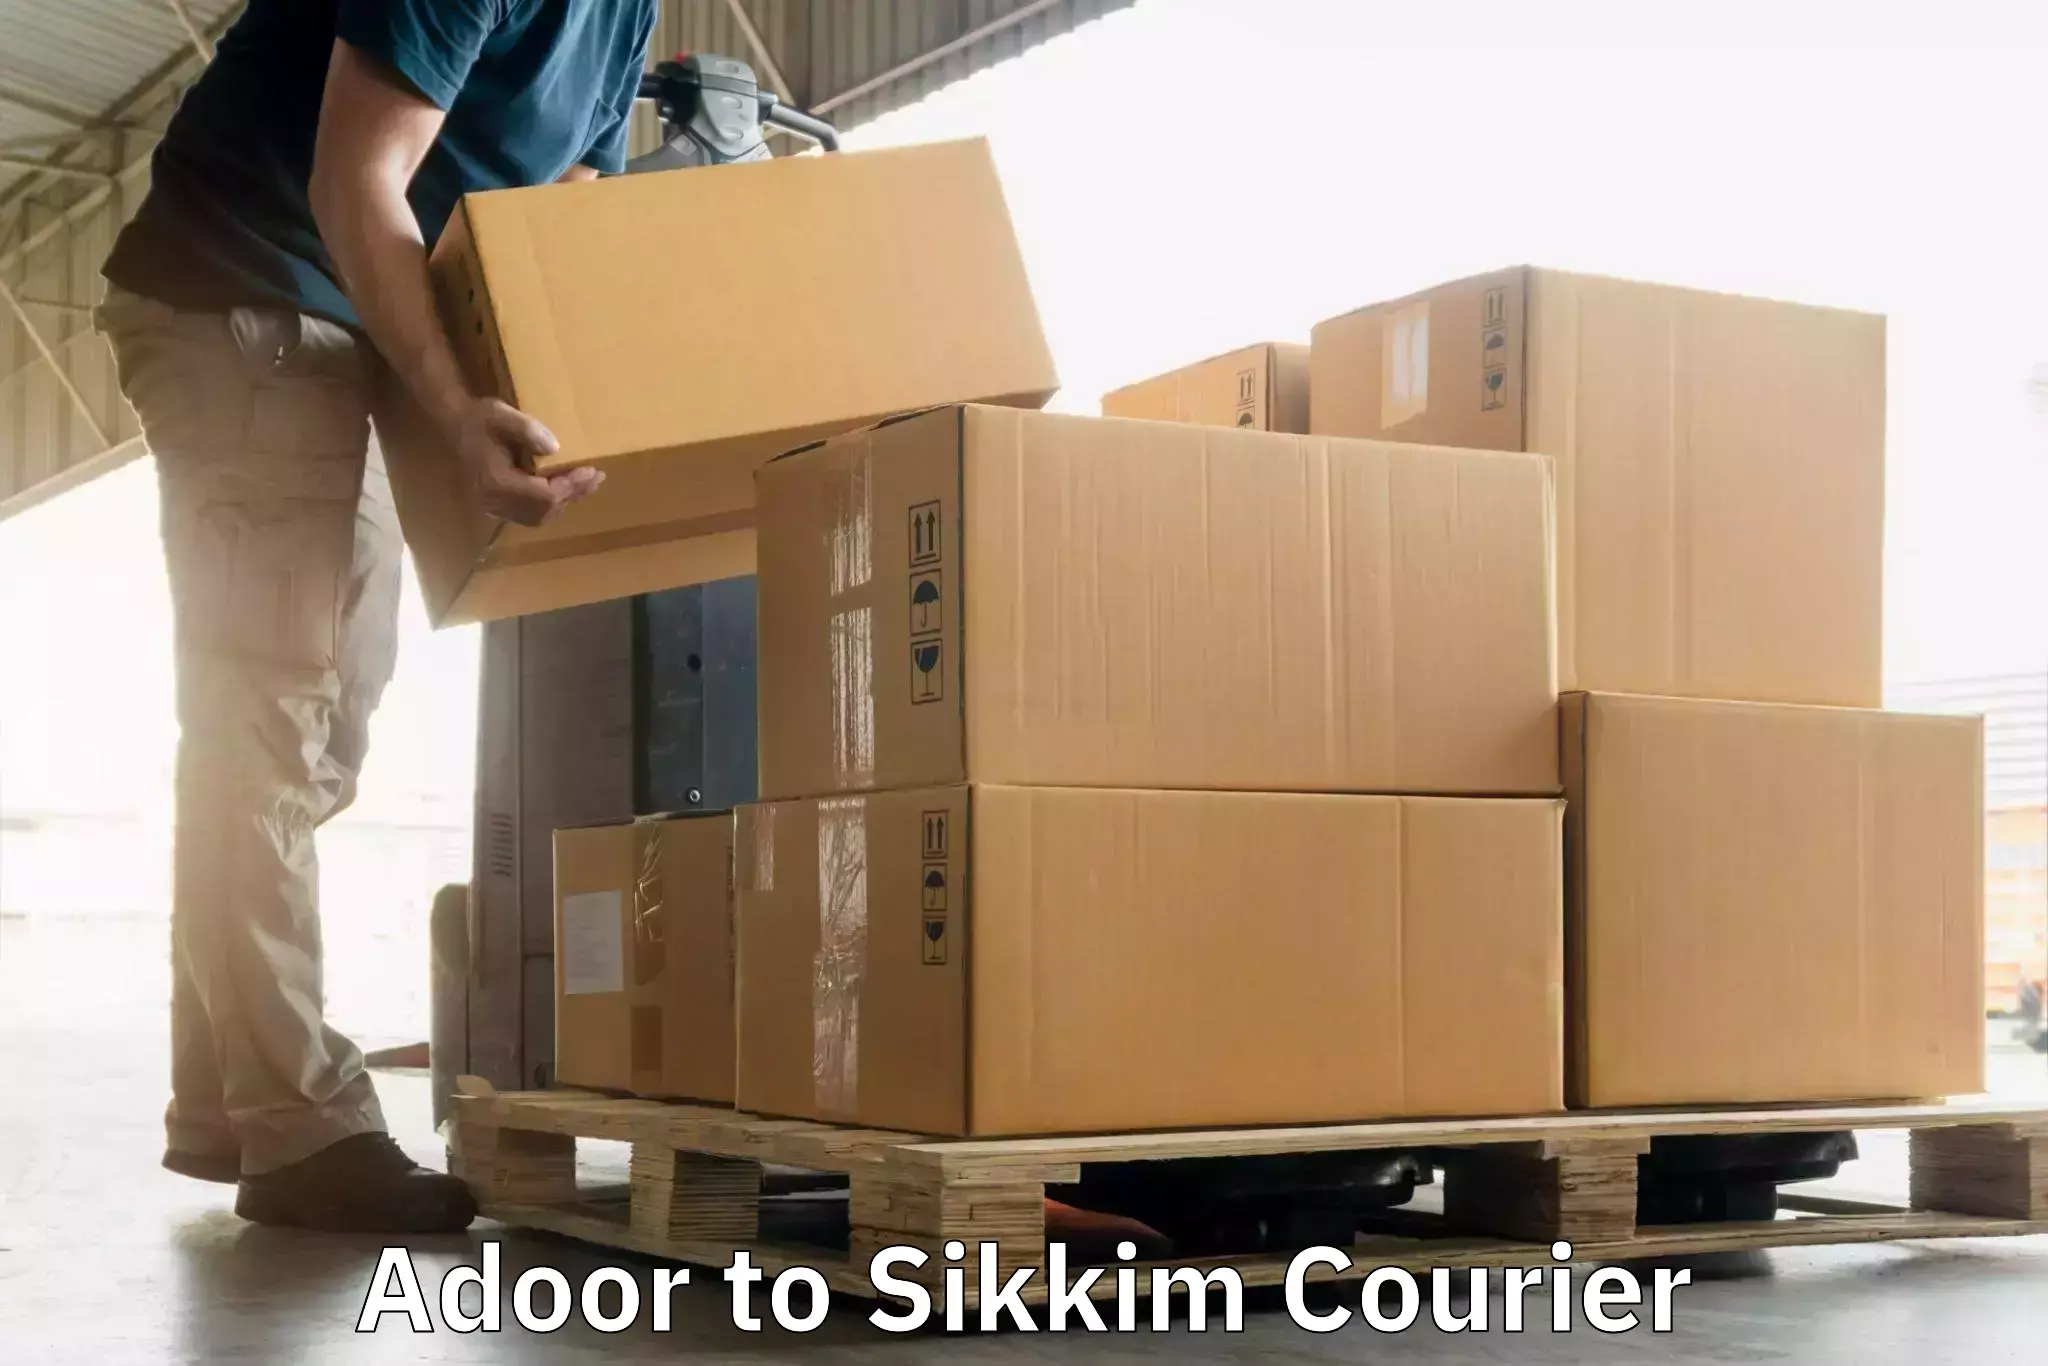 Multi-city courier Adoor to Pelling